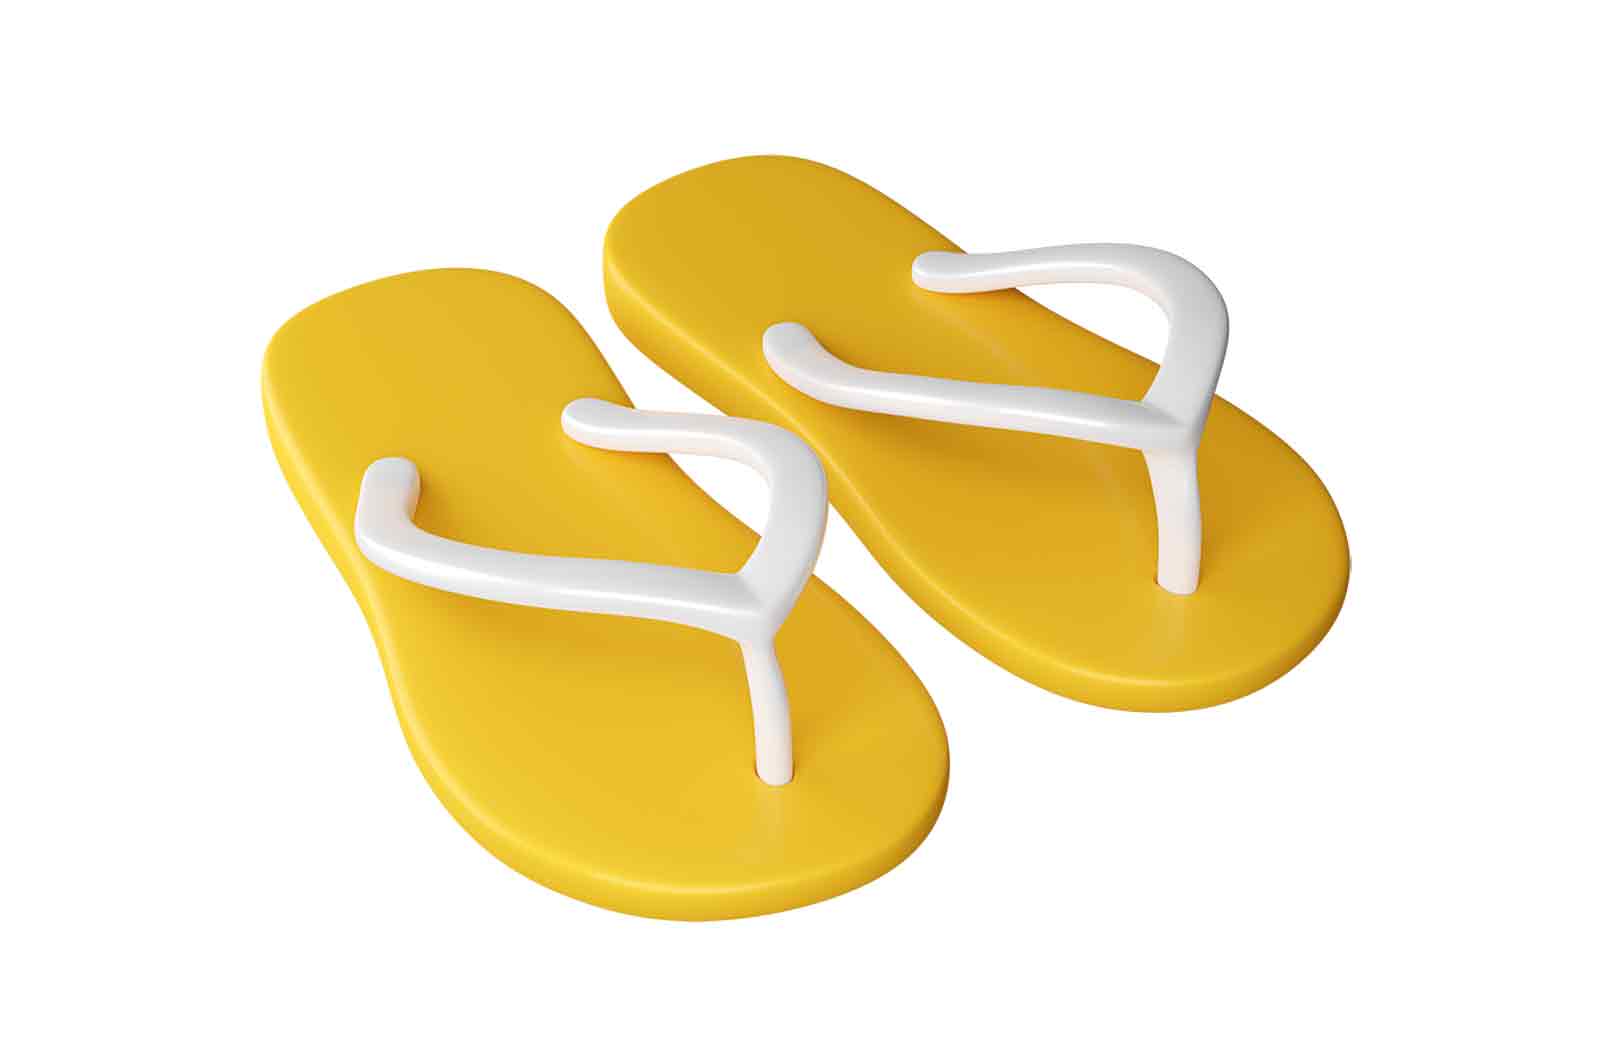 Yellow slippers summer flip flops 3d rendered icon illustration. Sandals or beach, shoes. Slip-on shoe for swimming pool